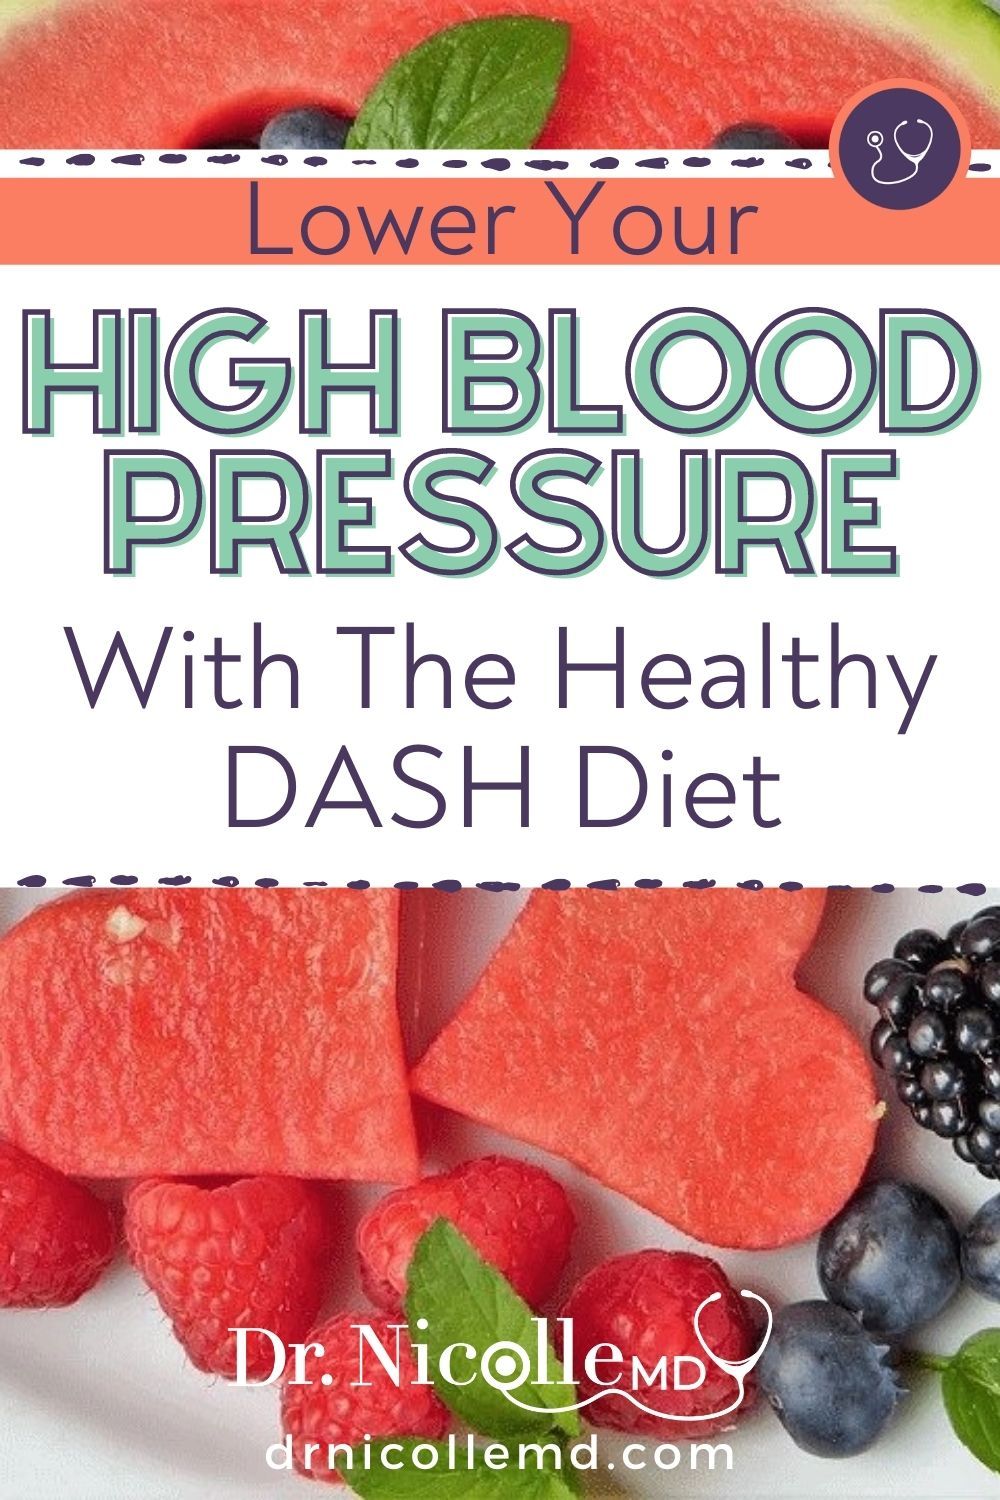 Lower Your High Blood Pressure With The Healthy DASH Diet